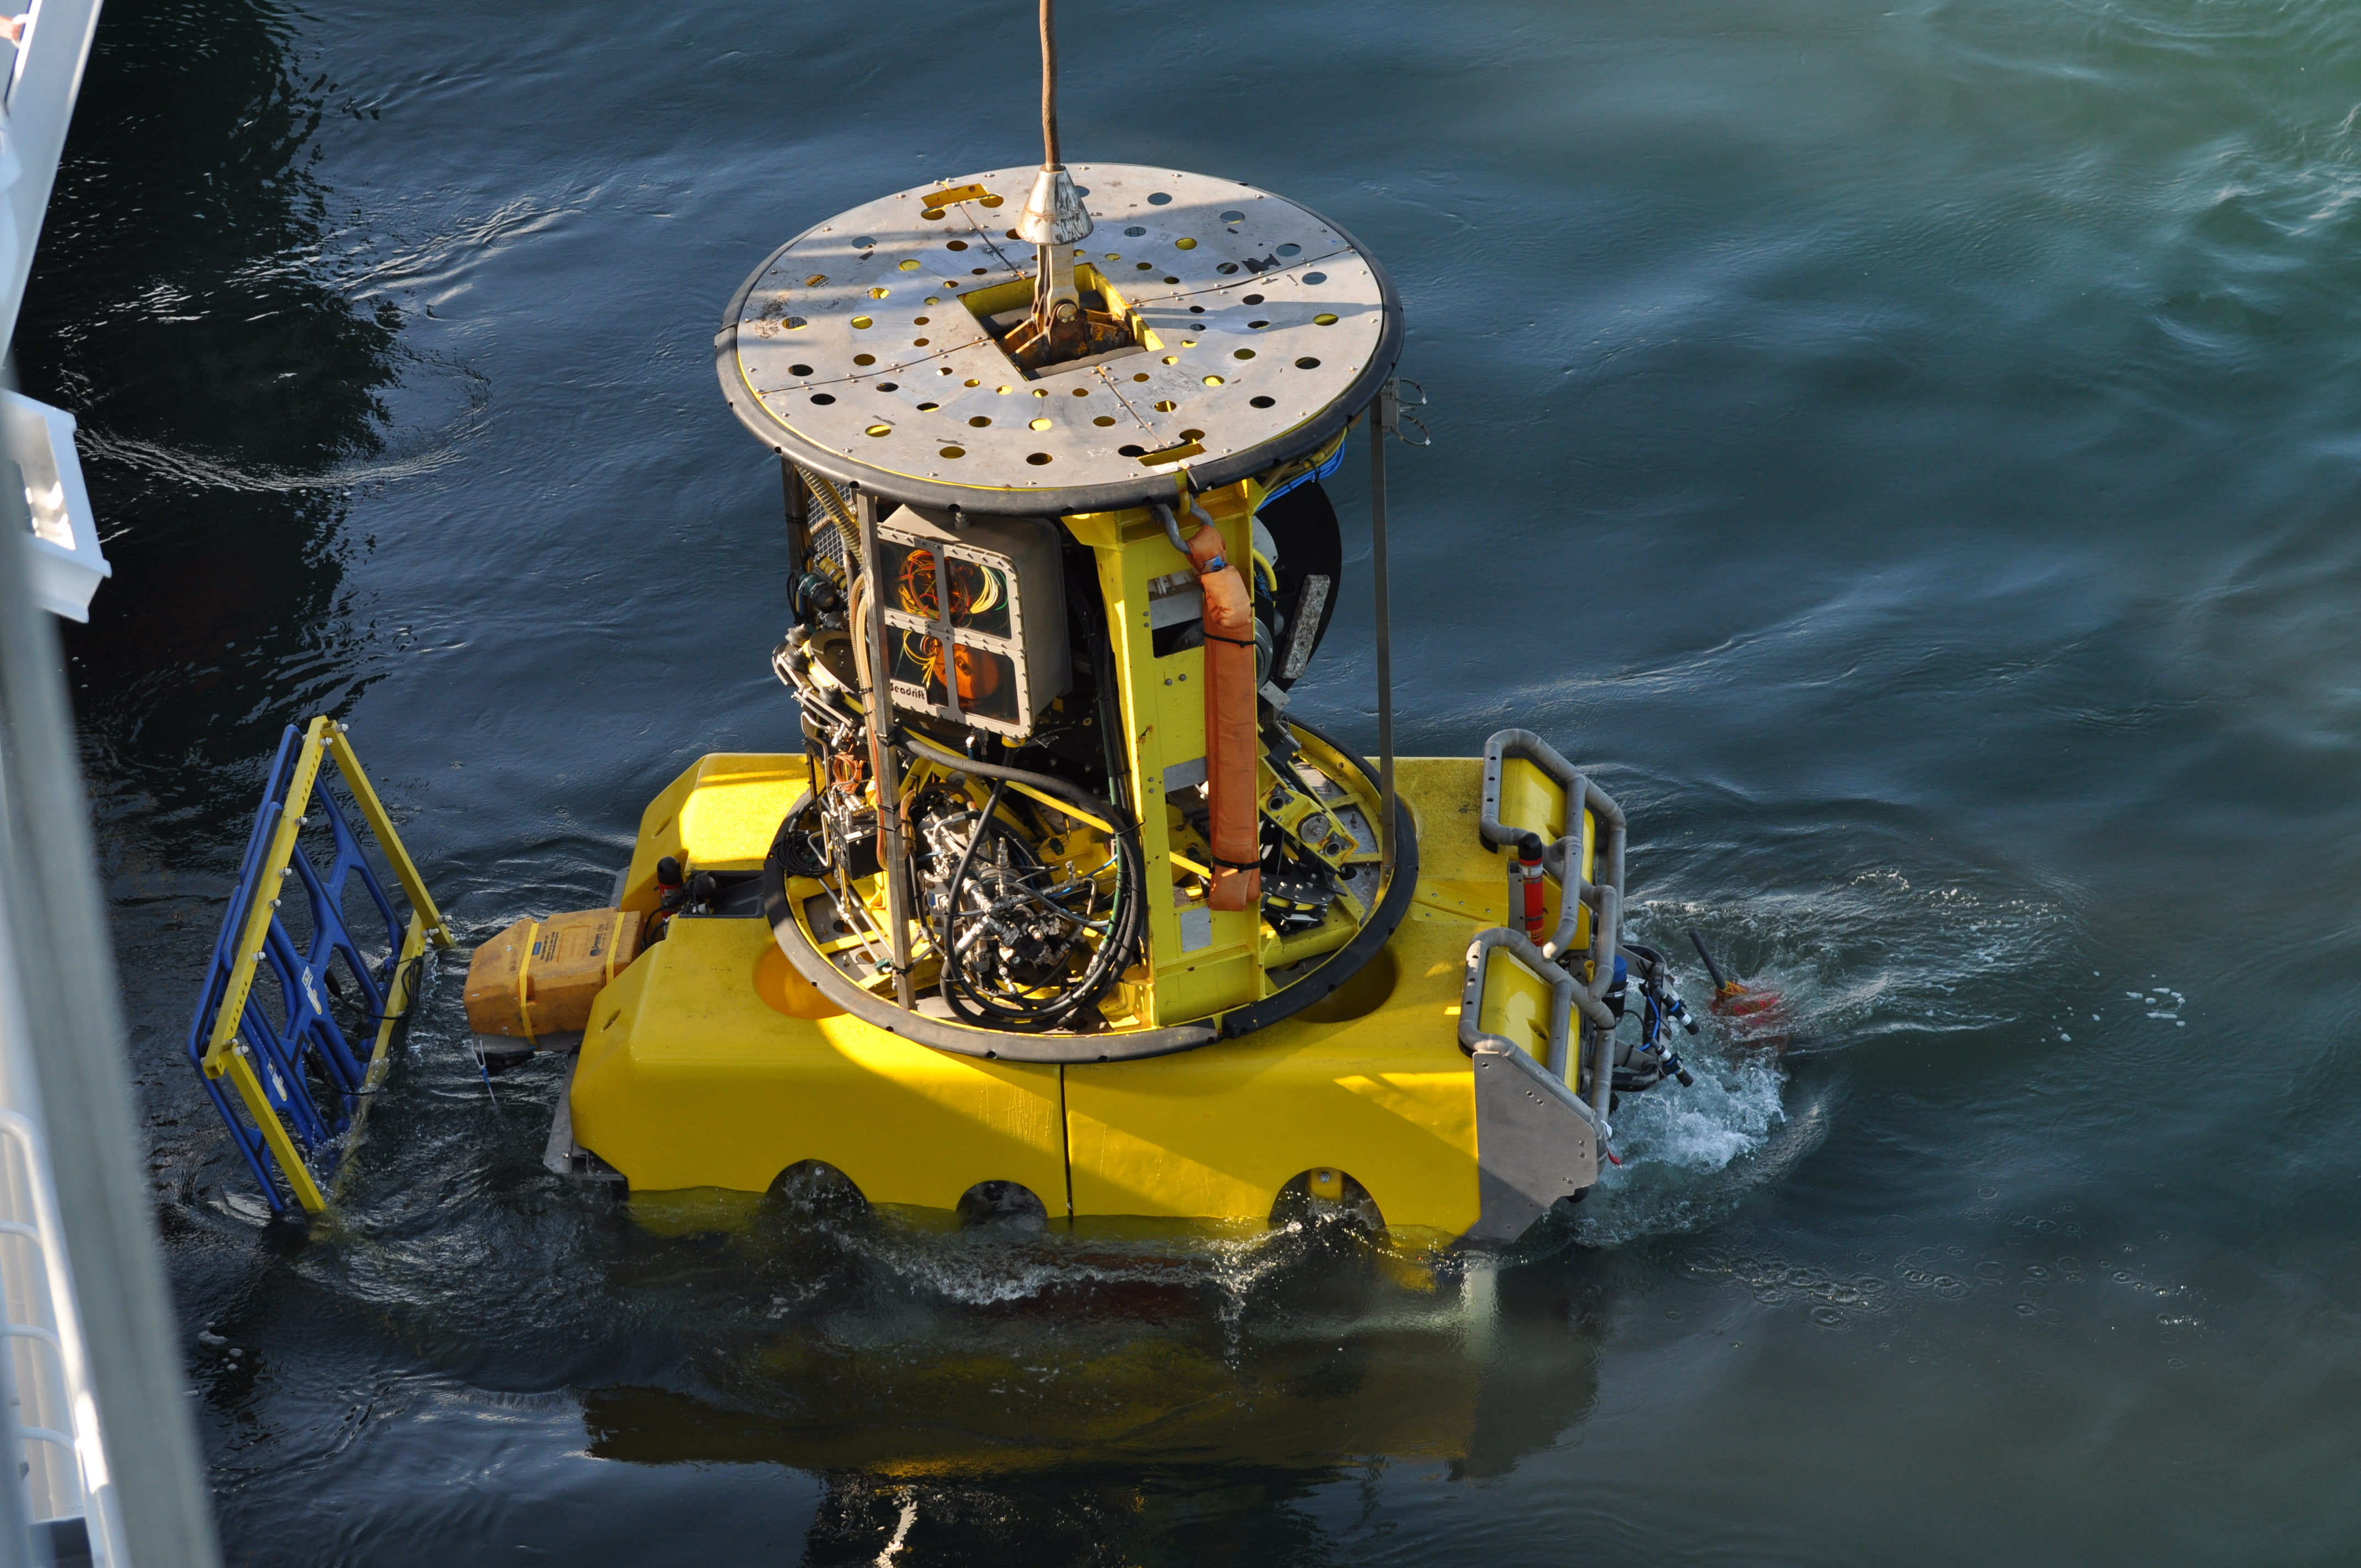 ROV - remotely operated vehicle